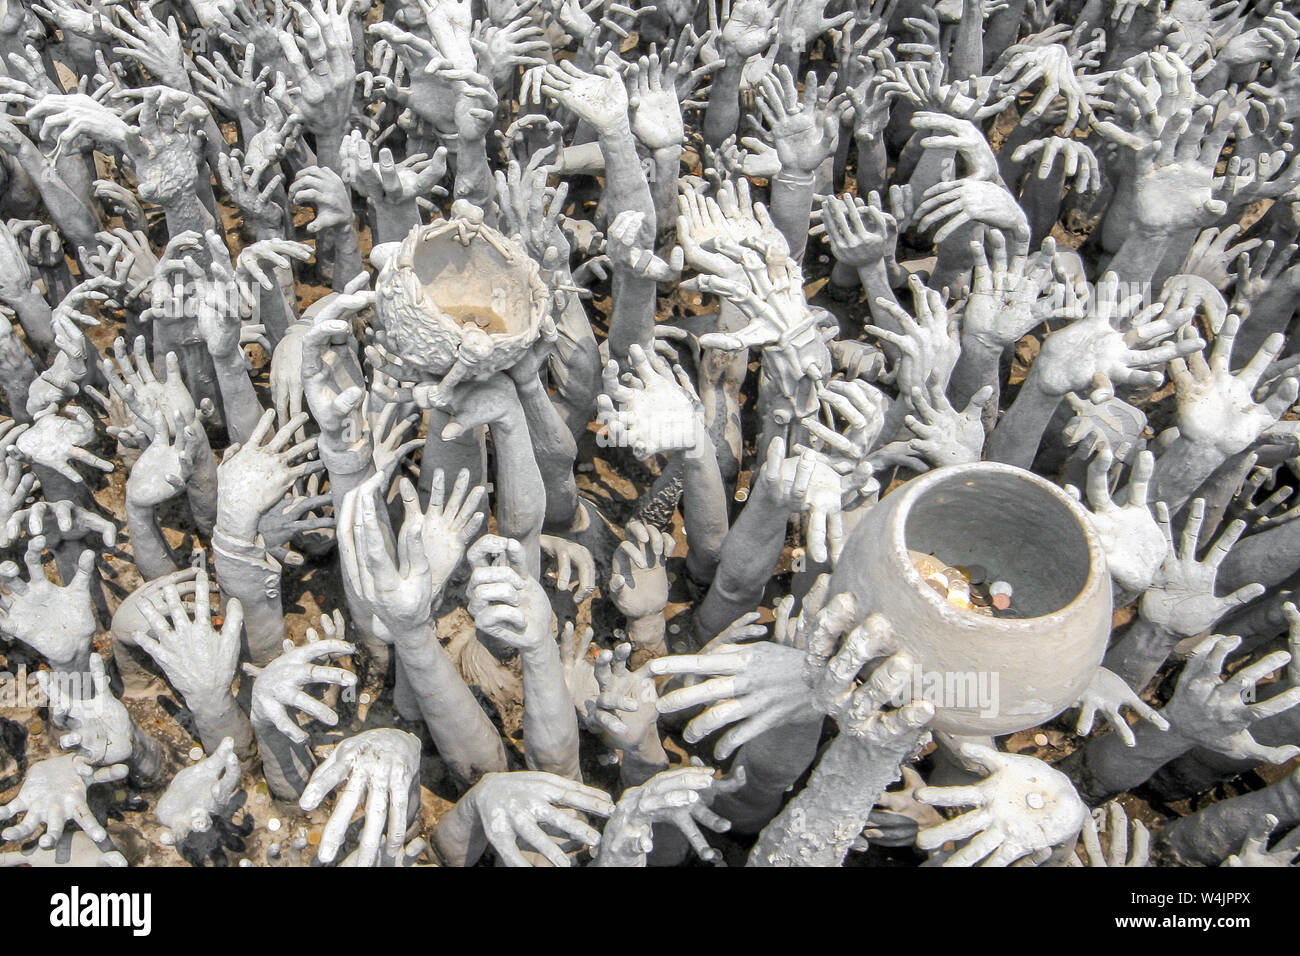 Hundreds of outreaching hands symbolize desire at the Wat Rong Khun, White Timple, at Chiang Rai, Thailand. Stock Photo